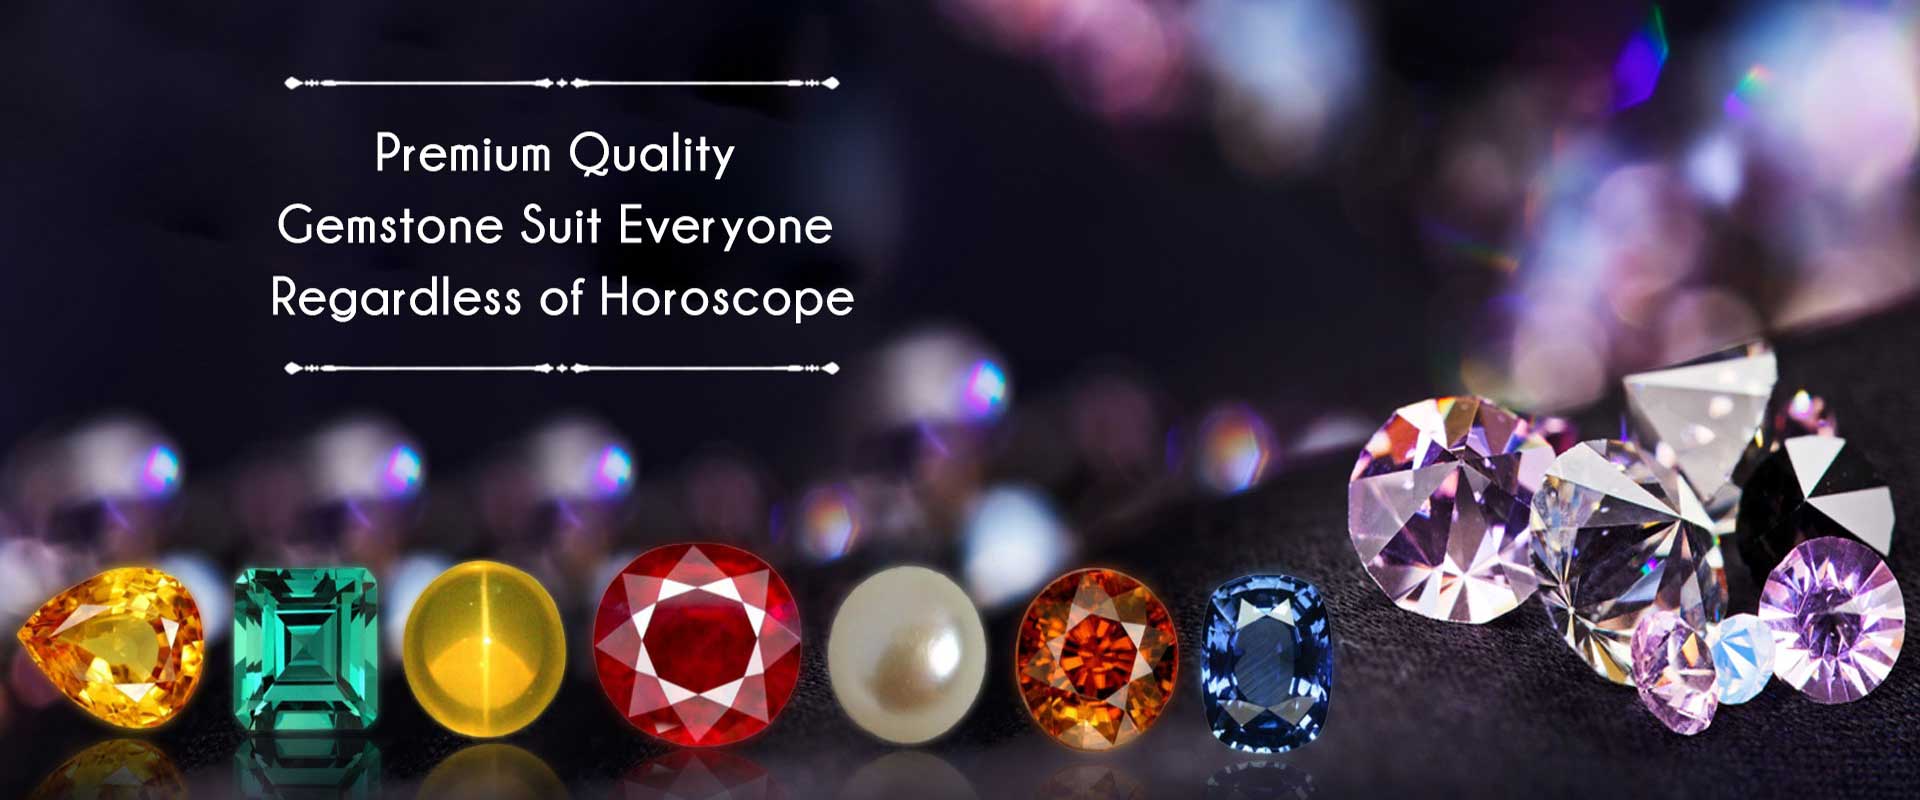 complicated logic behind the way gemstones function